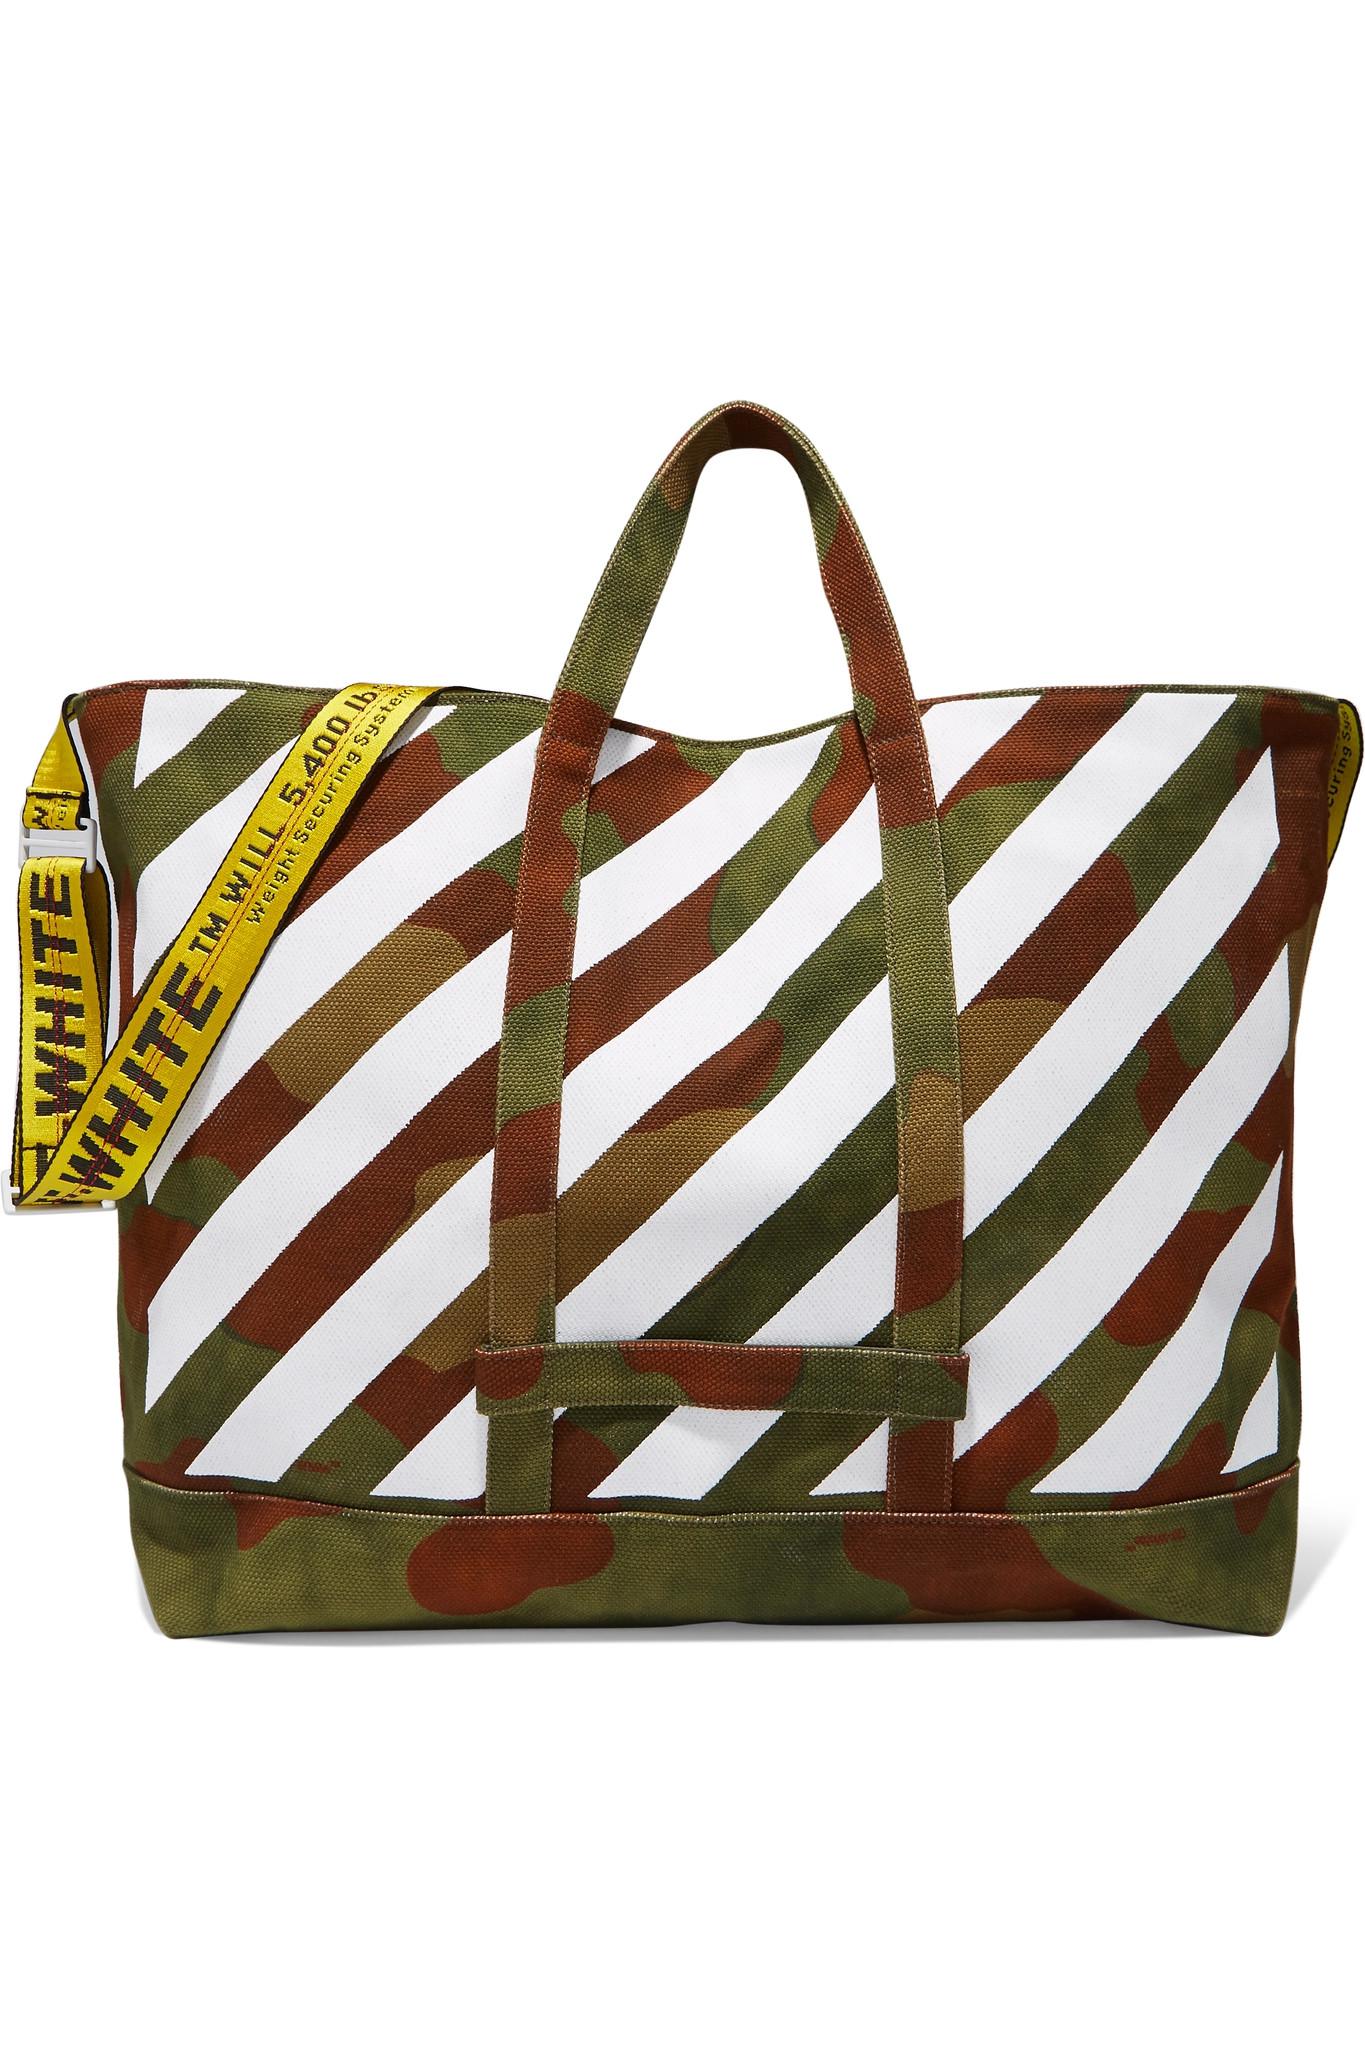 Off-White c/o Virgil Abloh Printed Canvas Tote in Army Green (Green) - Lyst